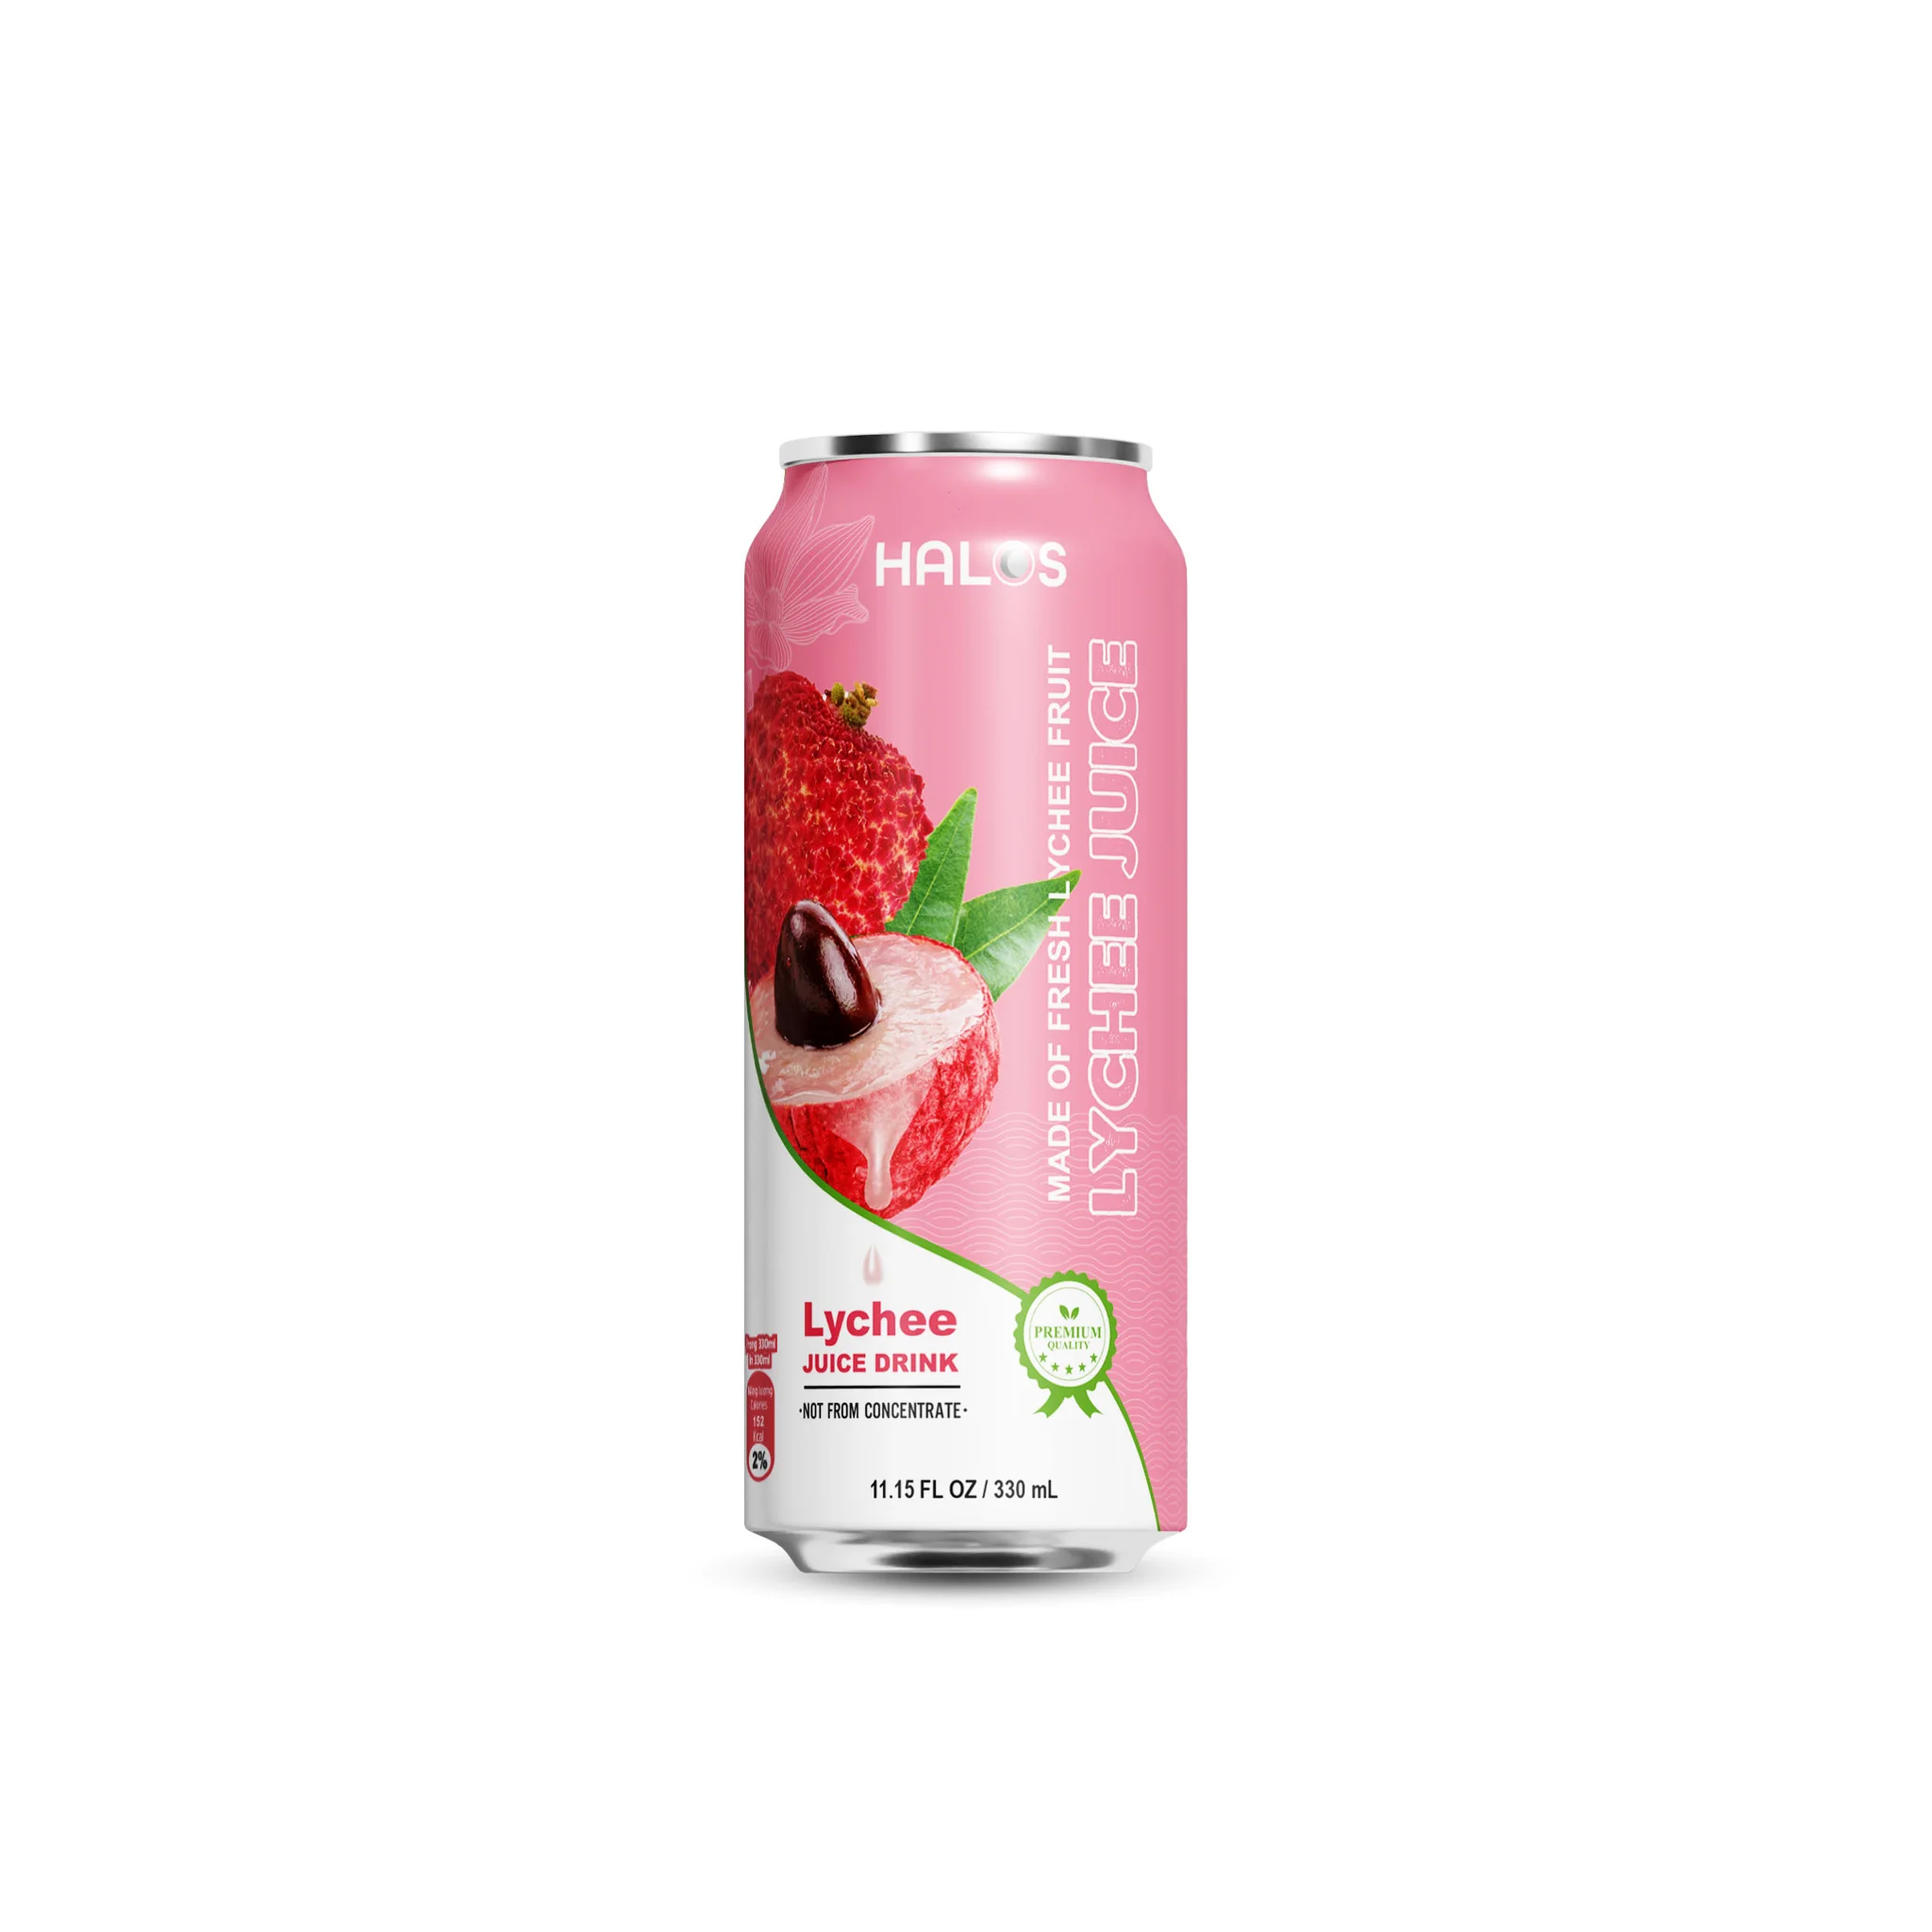 Halos/OEM Soursop Juice Drink in 330ml Can - By Halos Beverage Manufacturer From Vietnam